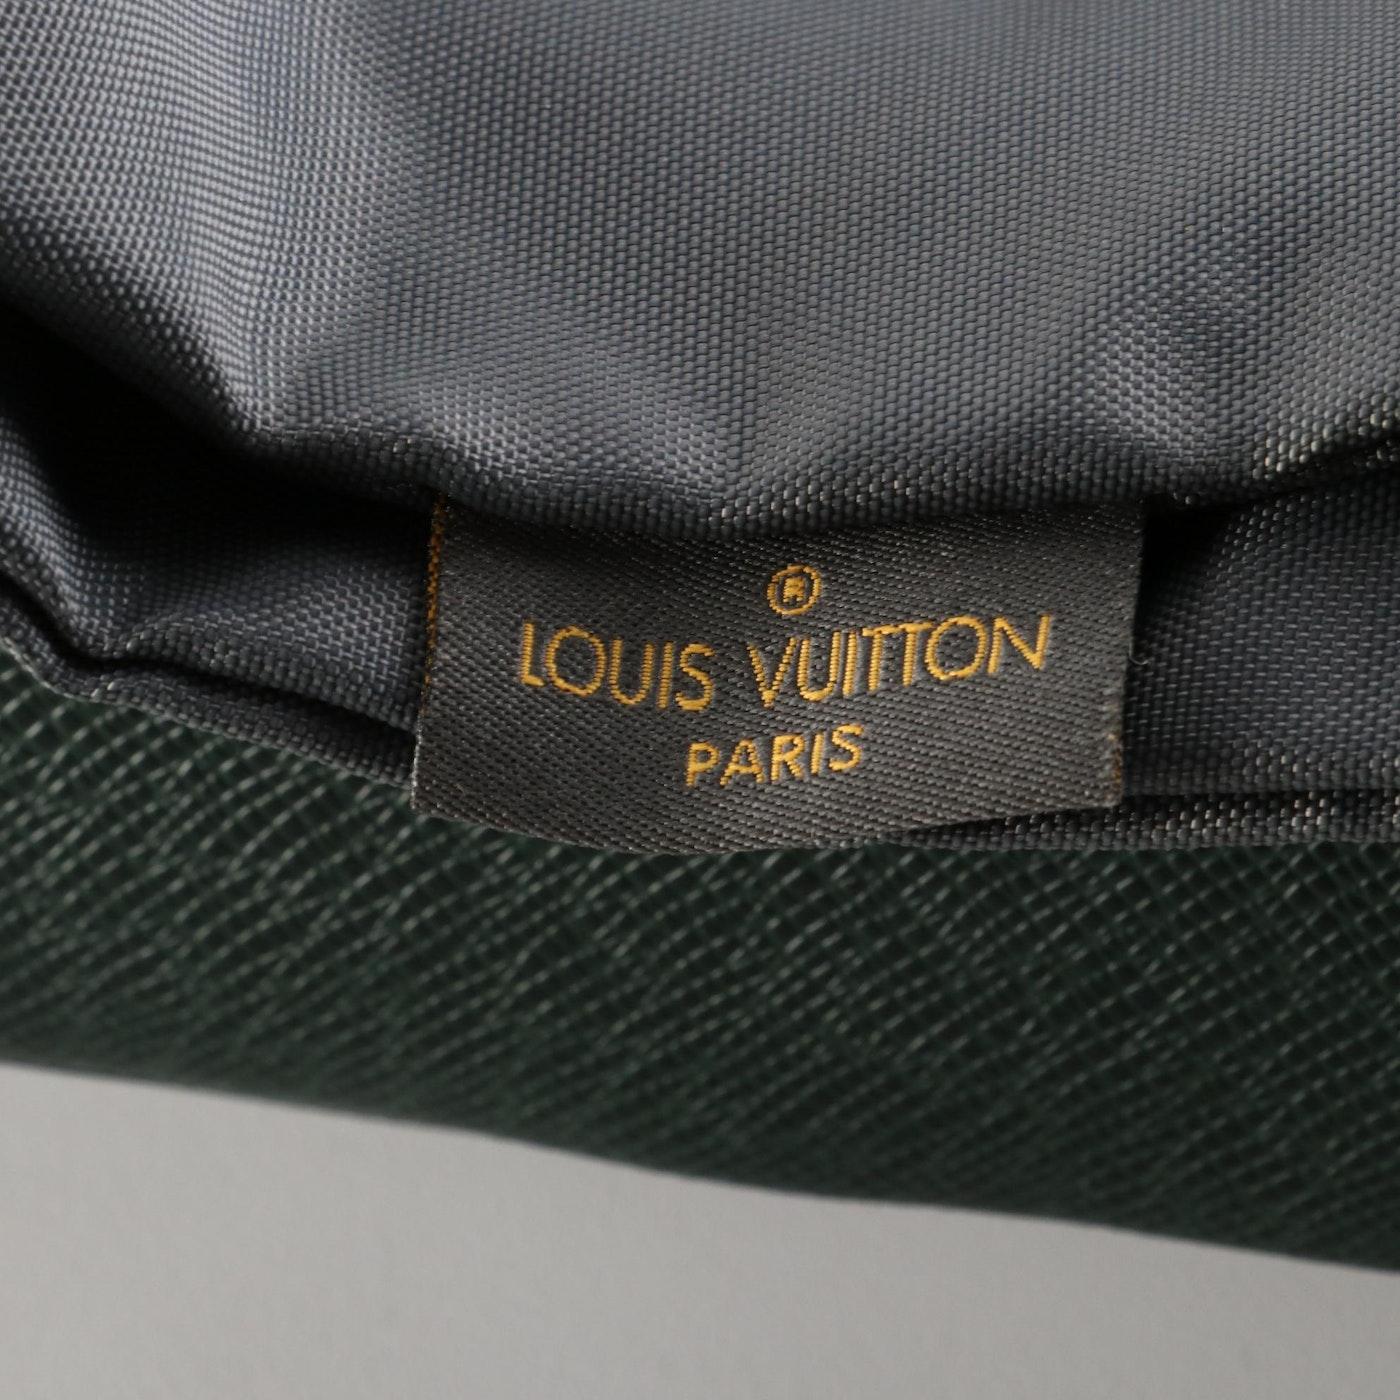 1998 Shockingly New! Louis Vuitton Kendall GM Travel Bag in Épicéa Taïga Leather For Sale 2